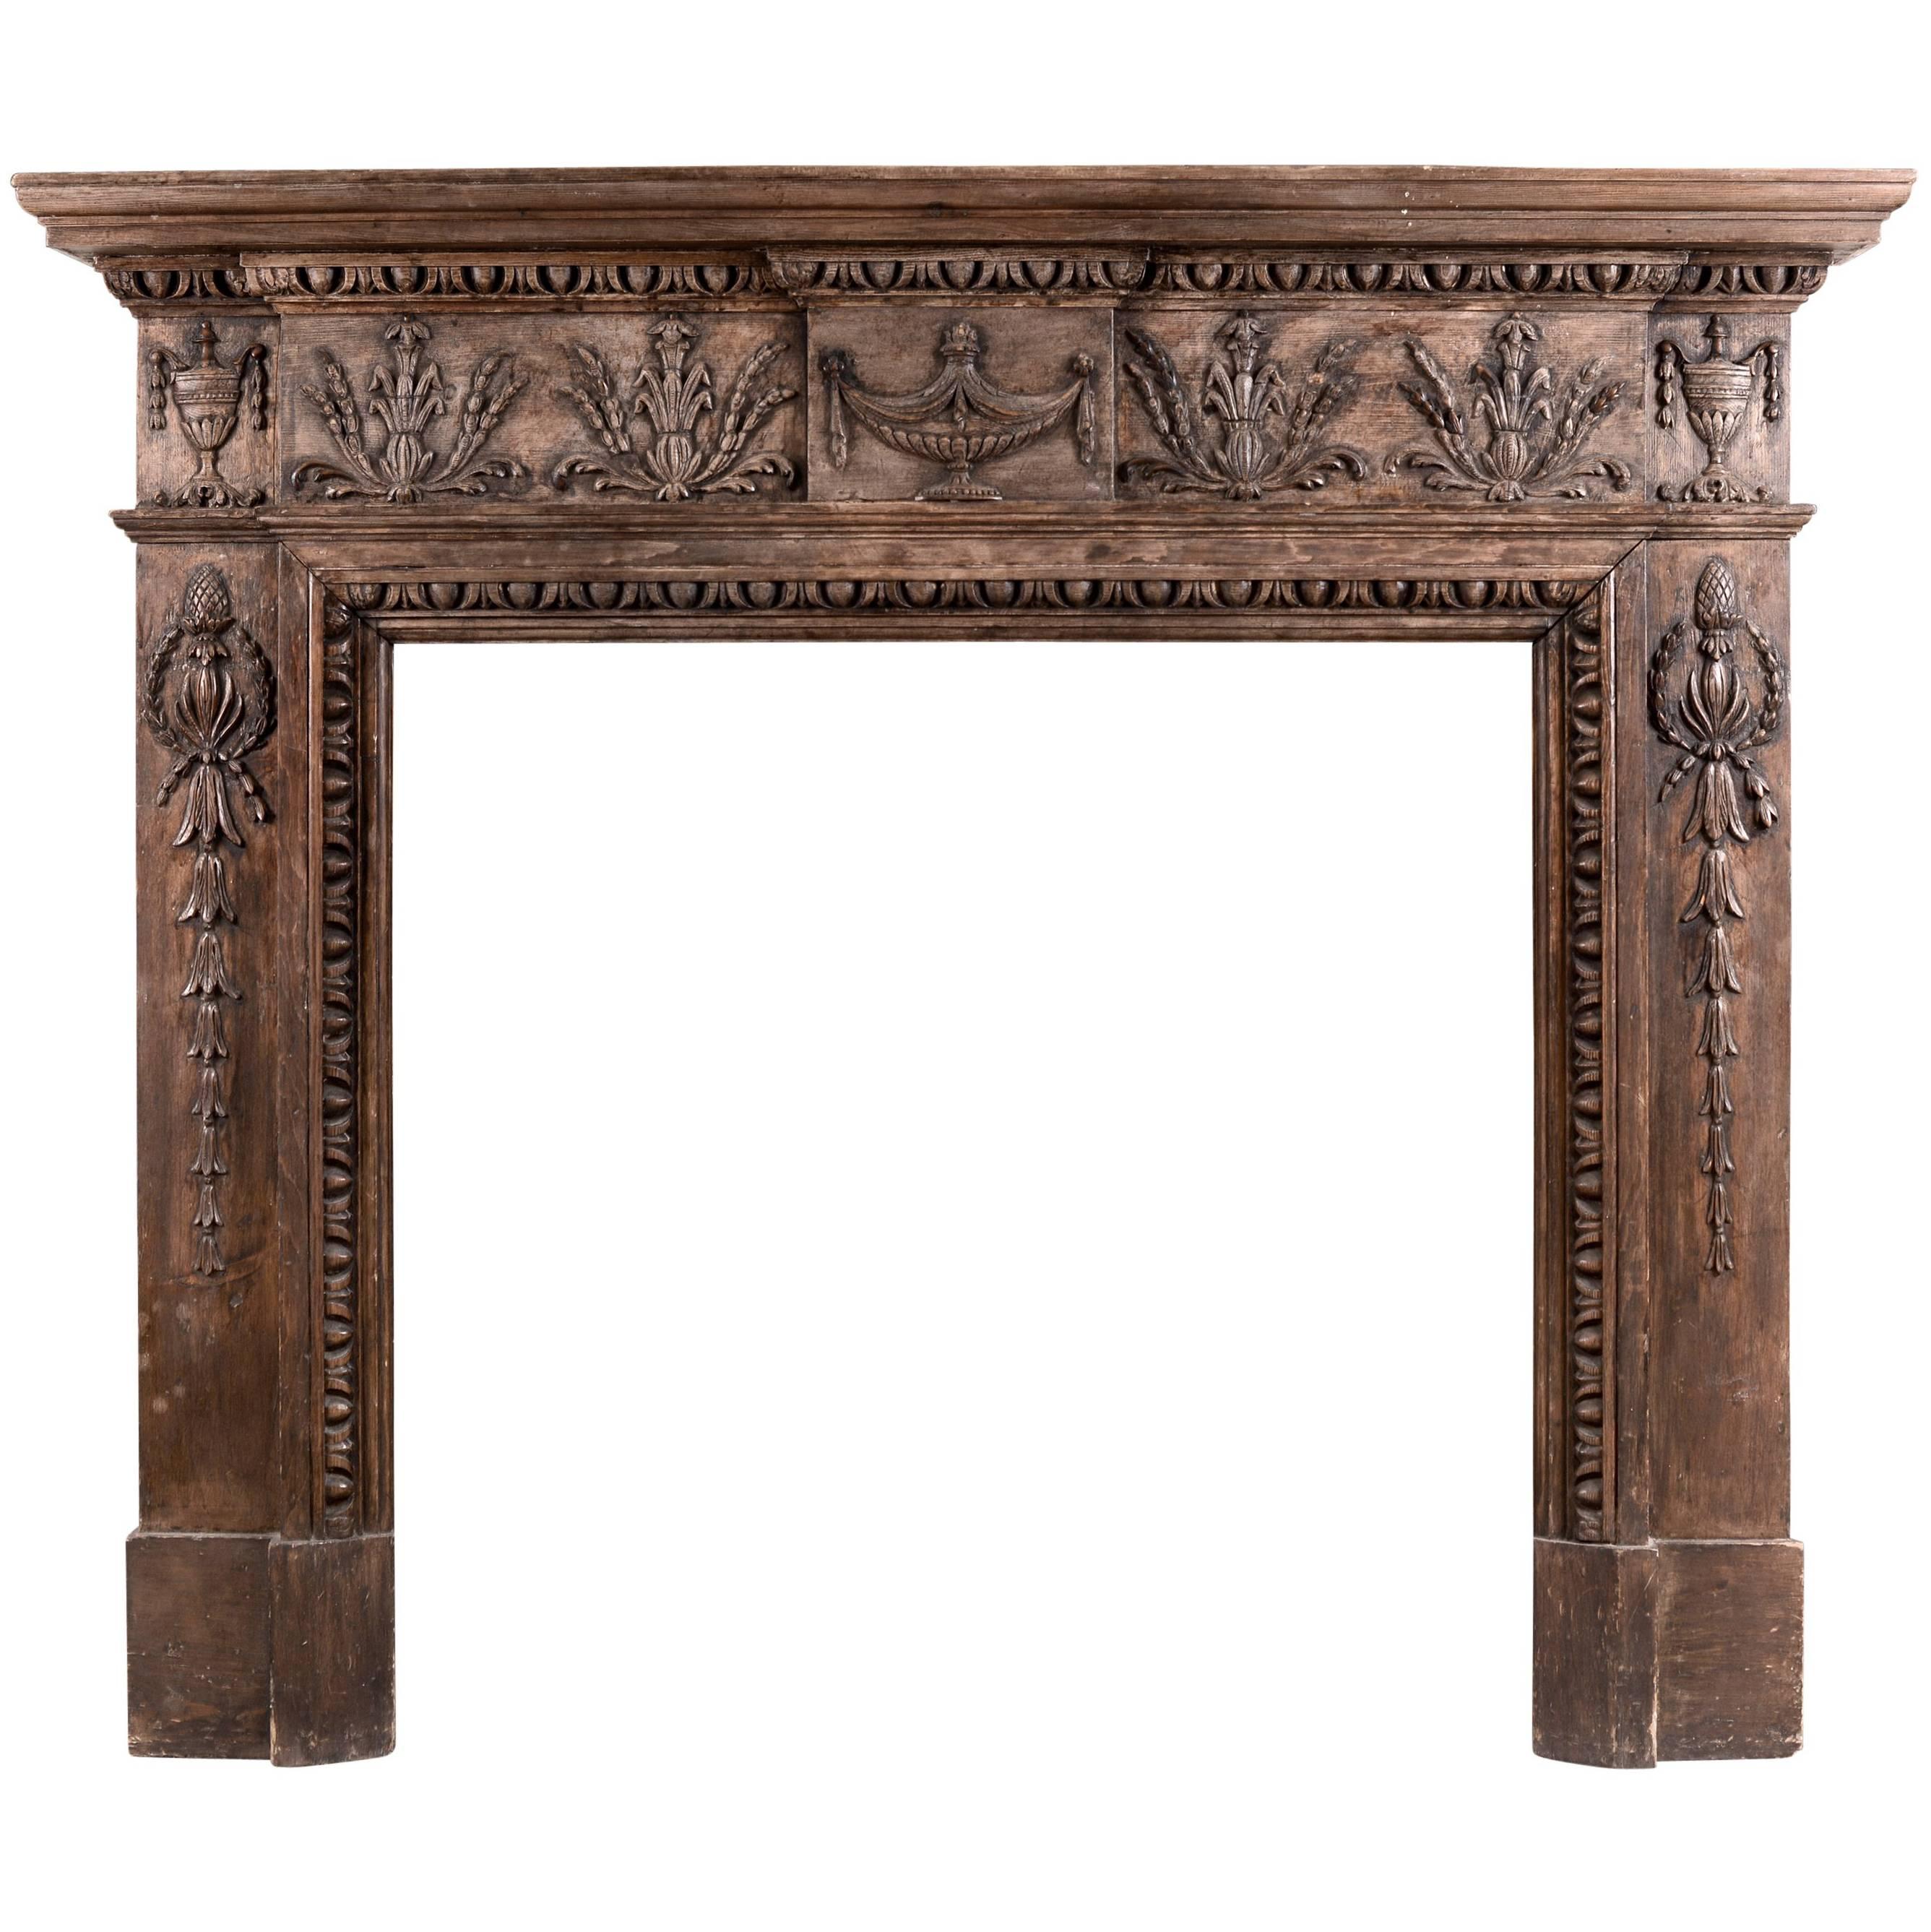 English Carved Wood Fireplace in the Late Georgian Style